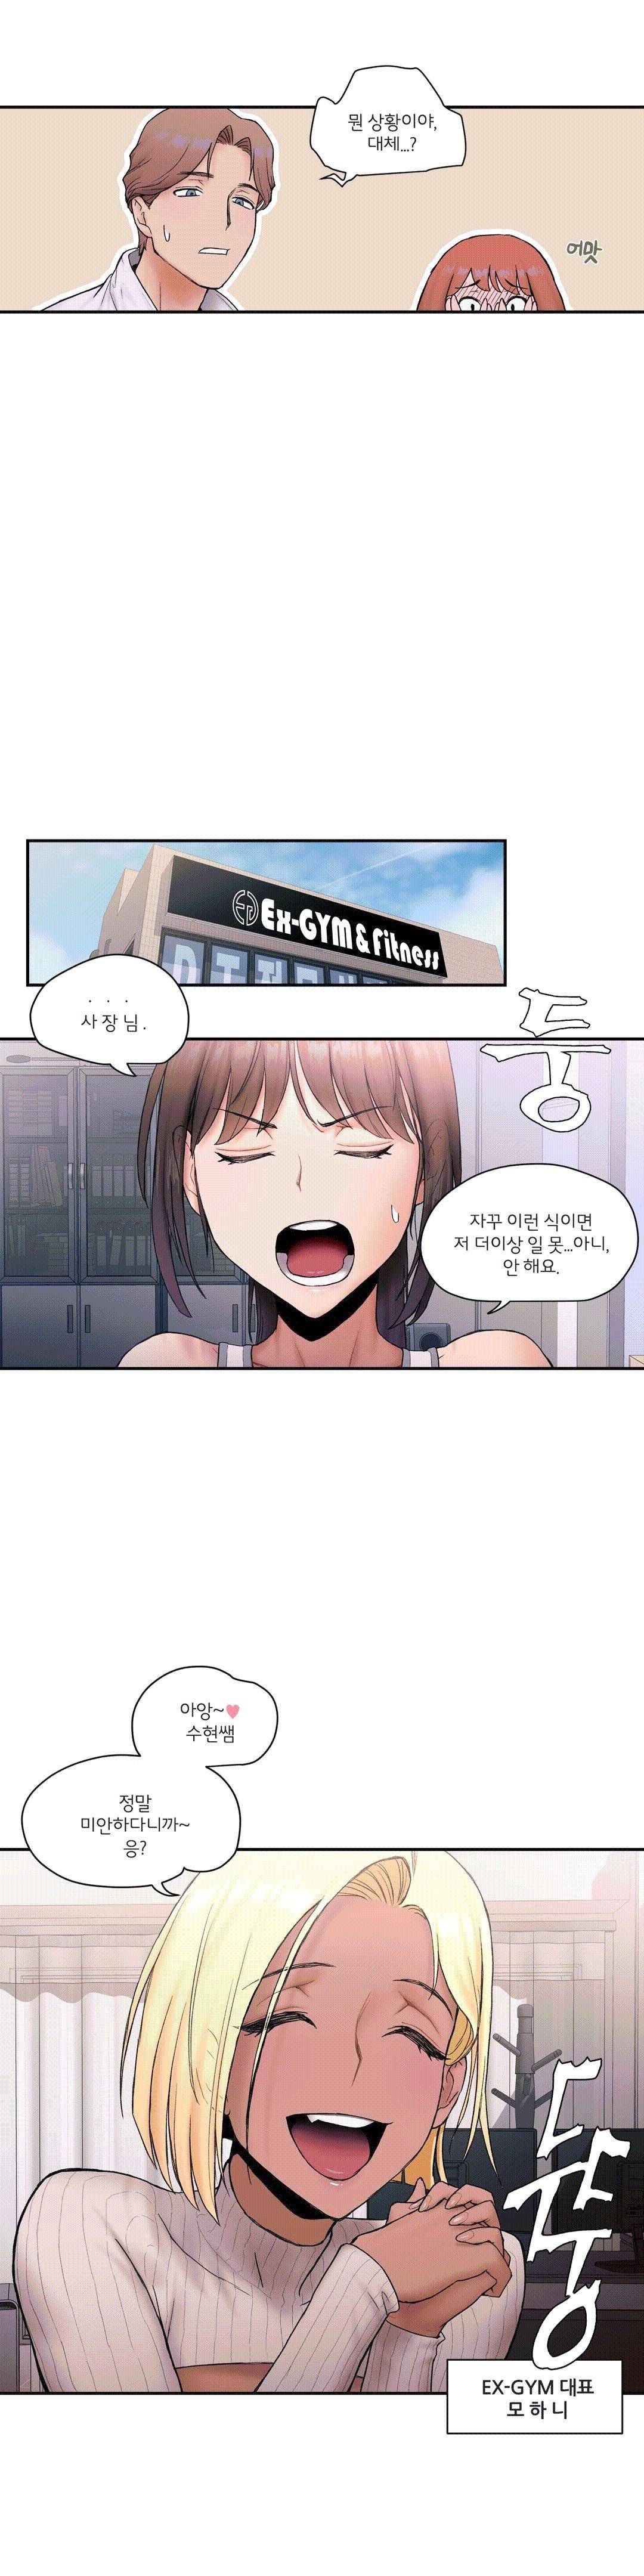 Sexercise Raw - Chapter 5 Page 23